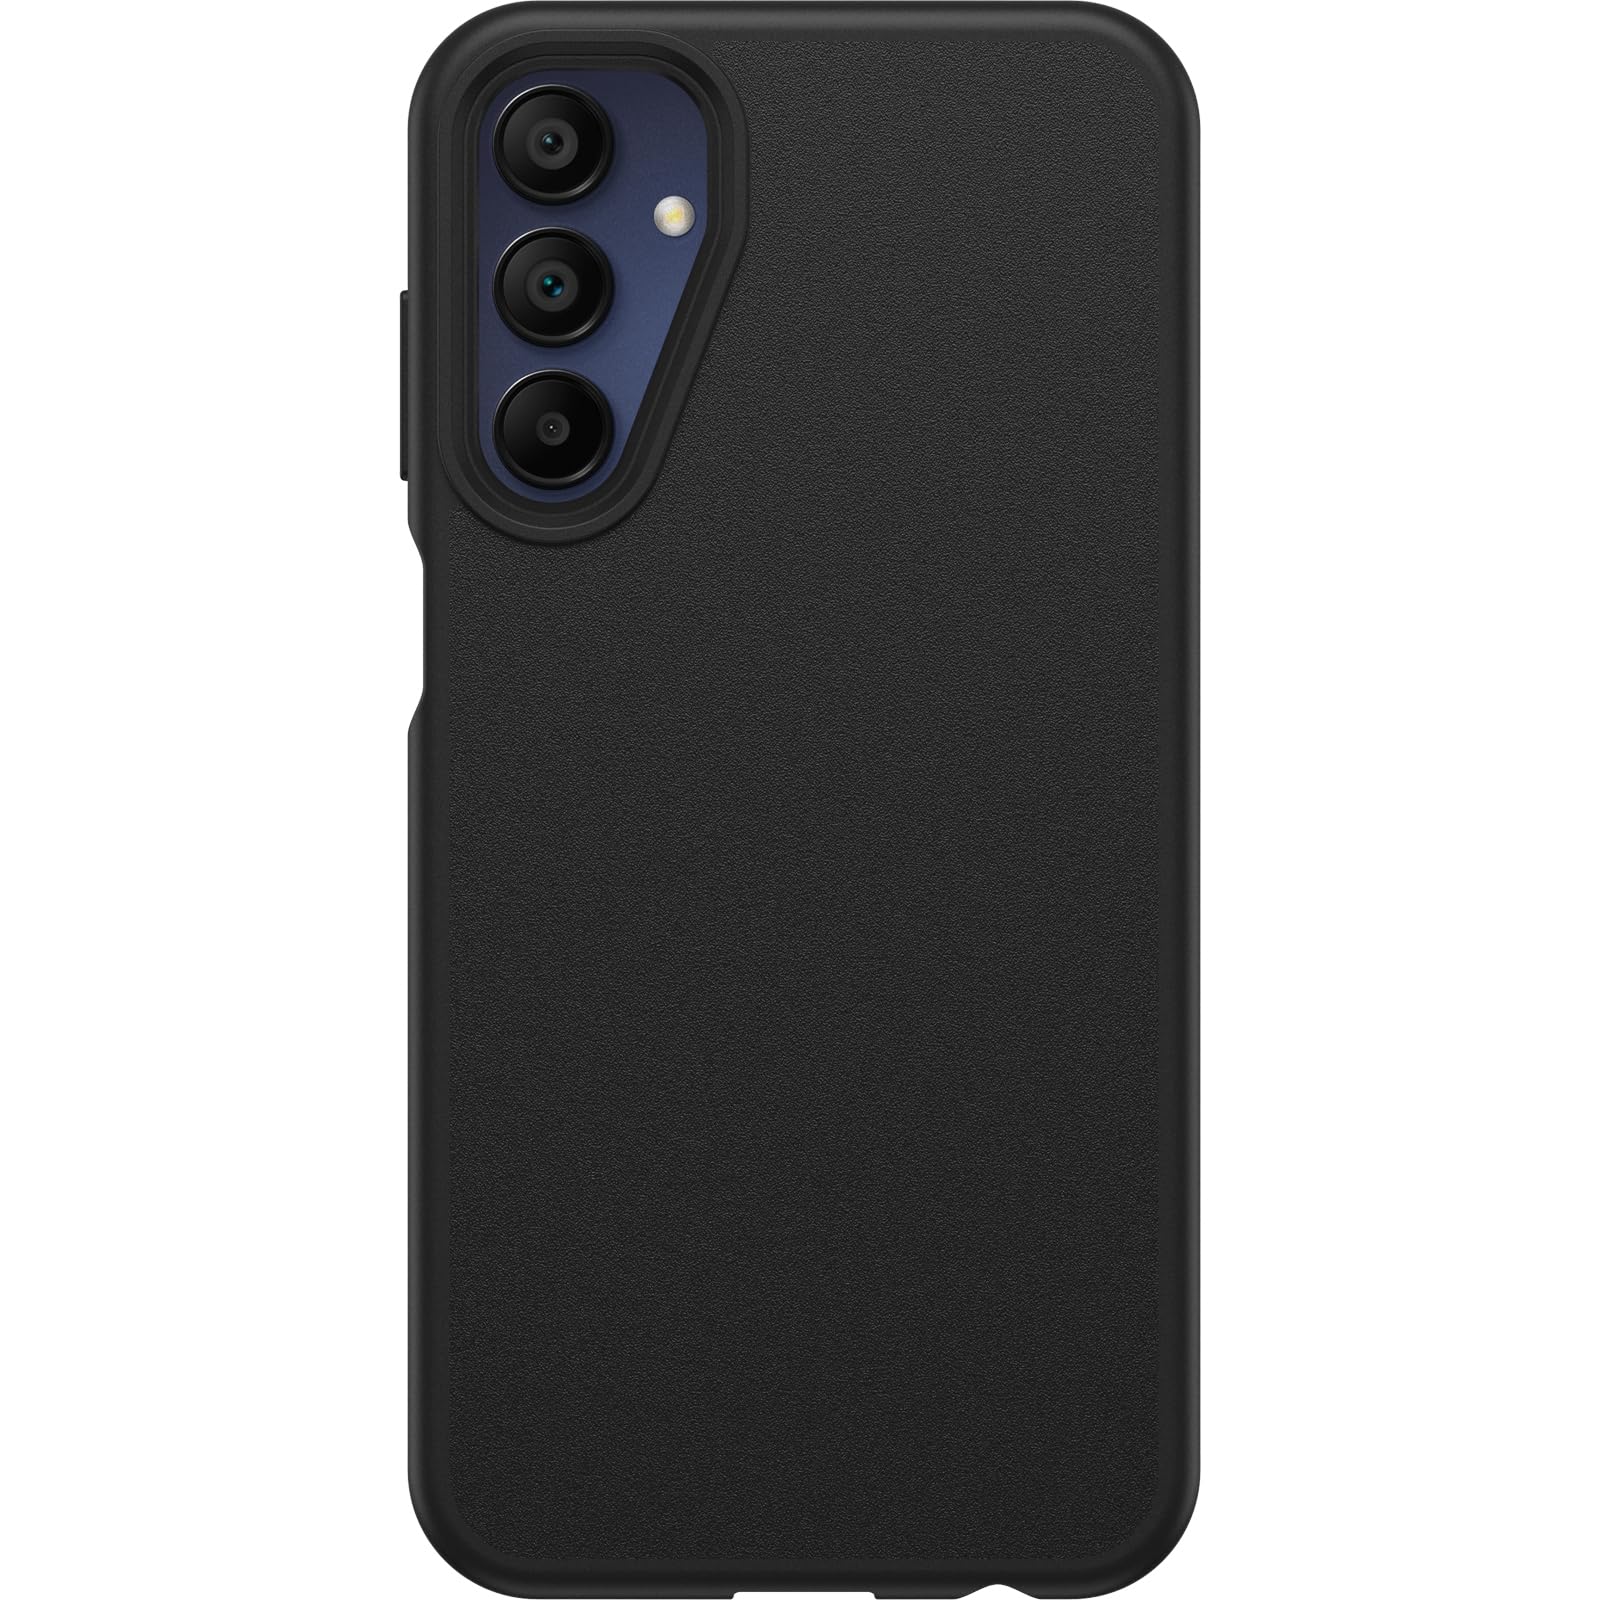 OtterBox Samsung Galaxy A15 5G Prefix Series Case - Black, Ultra-Thin, Pocket-Friendly, Raised Edges Protect Camera & Screen, Wireless Charging Compatible (Single Unit Ships in Polybag)